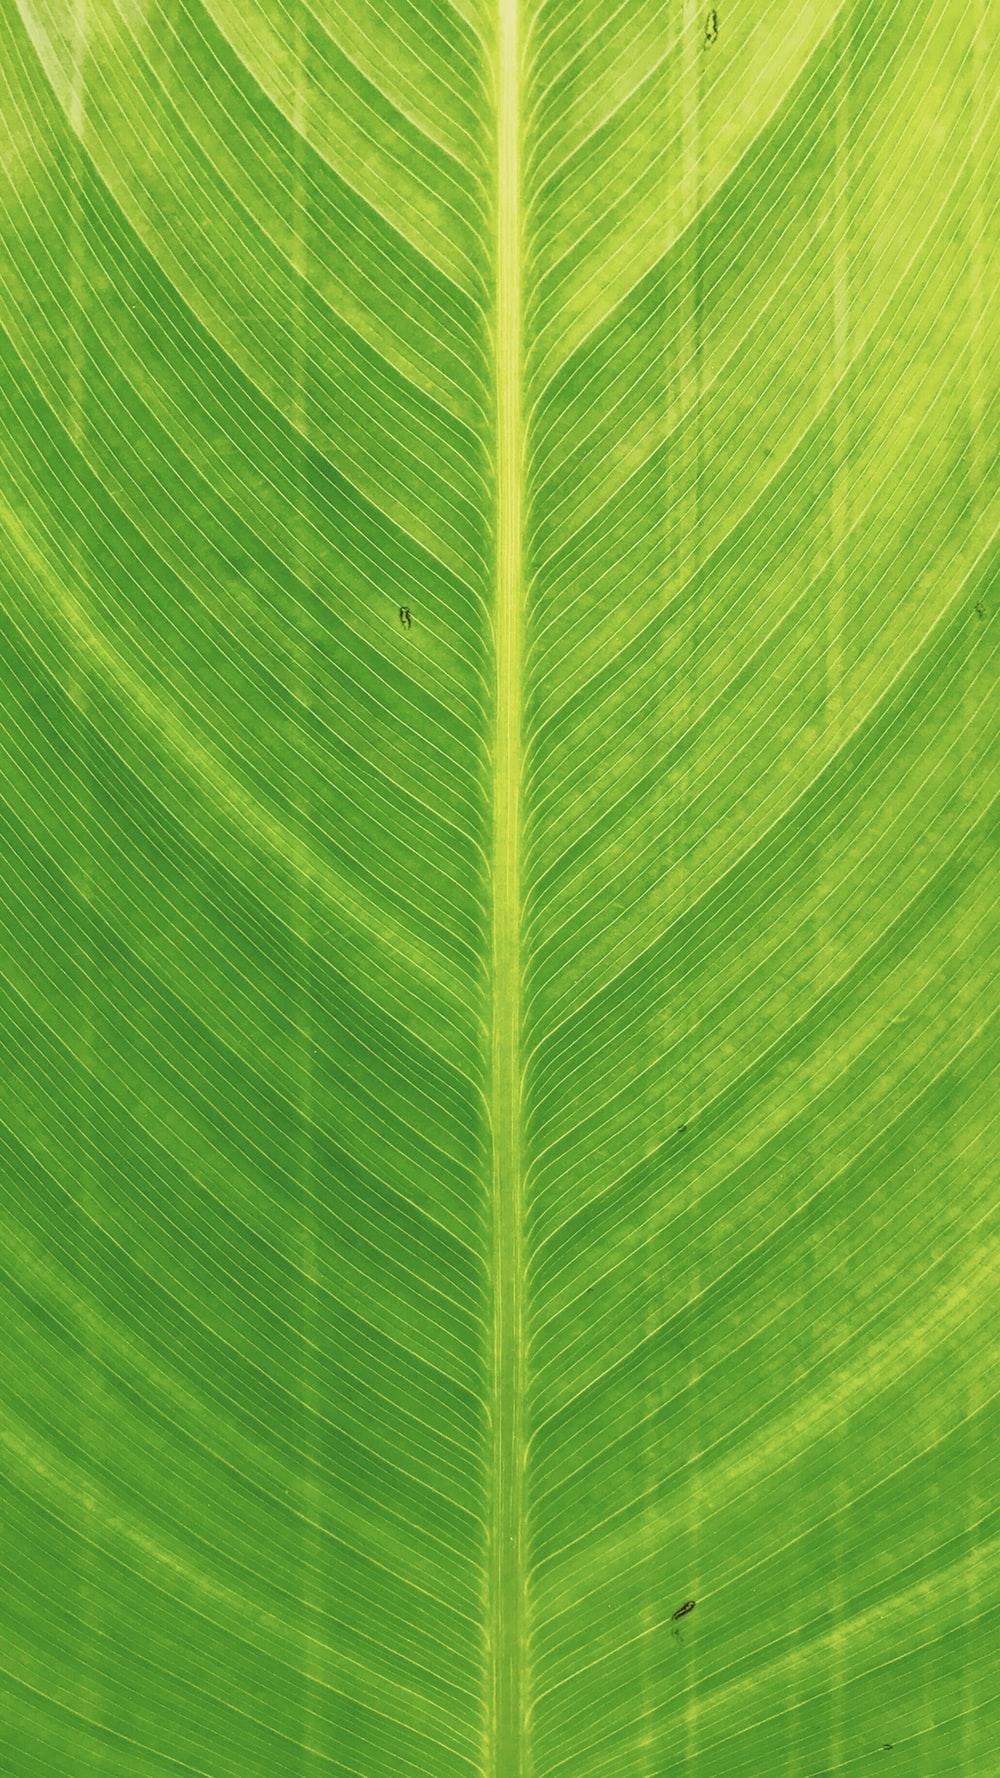 Photosynthesis Picture. Download Free Image